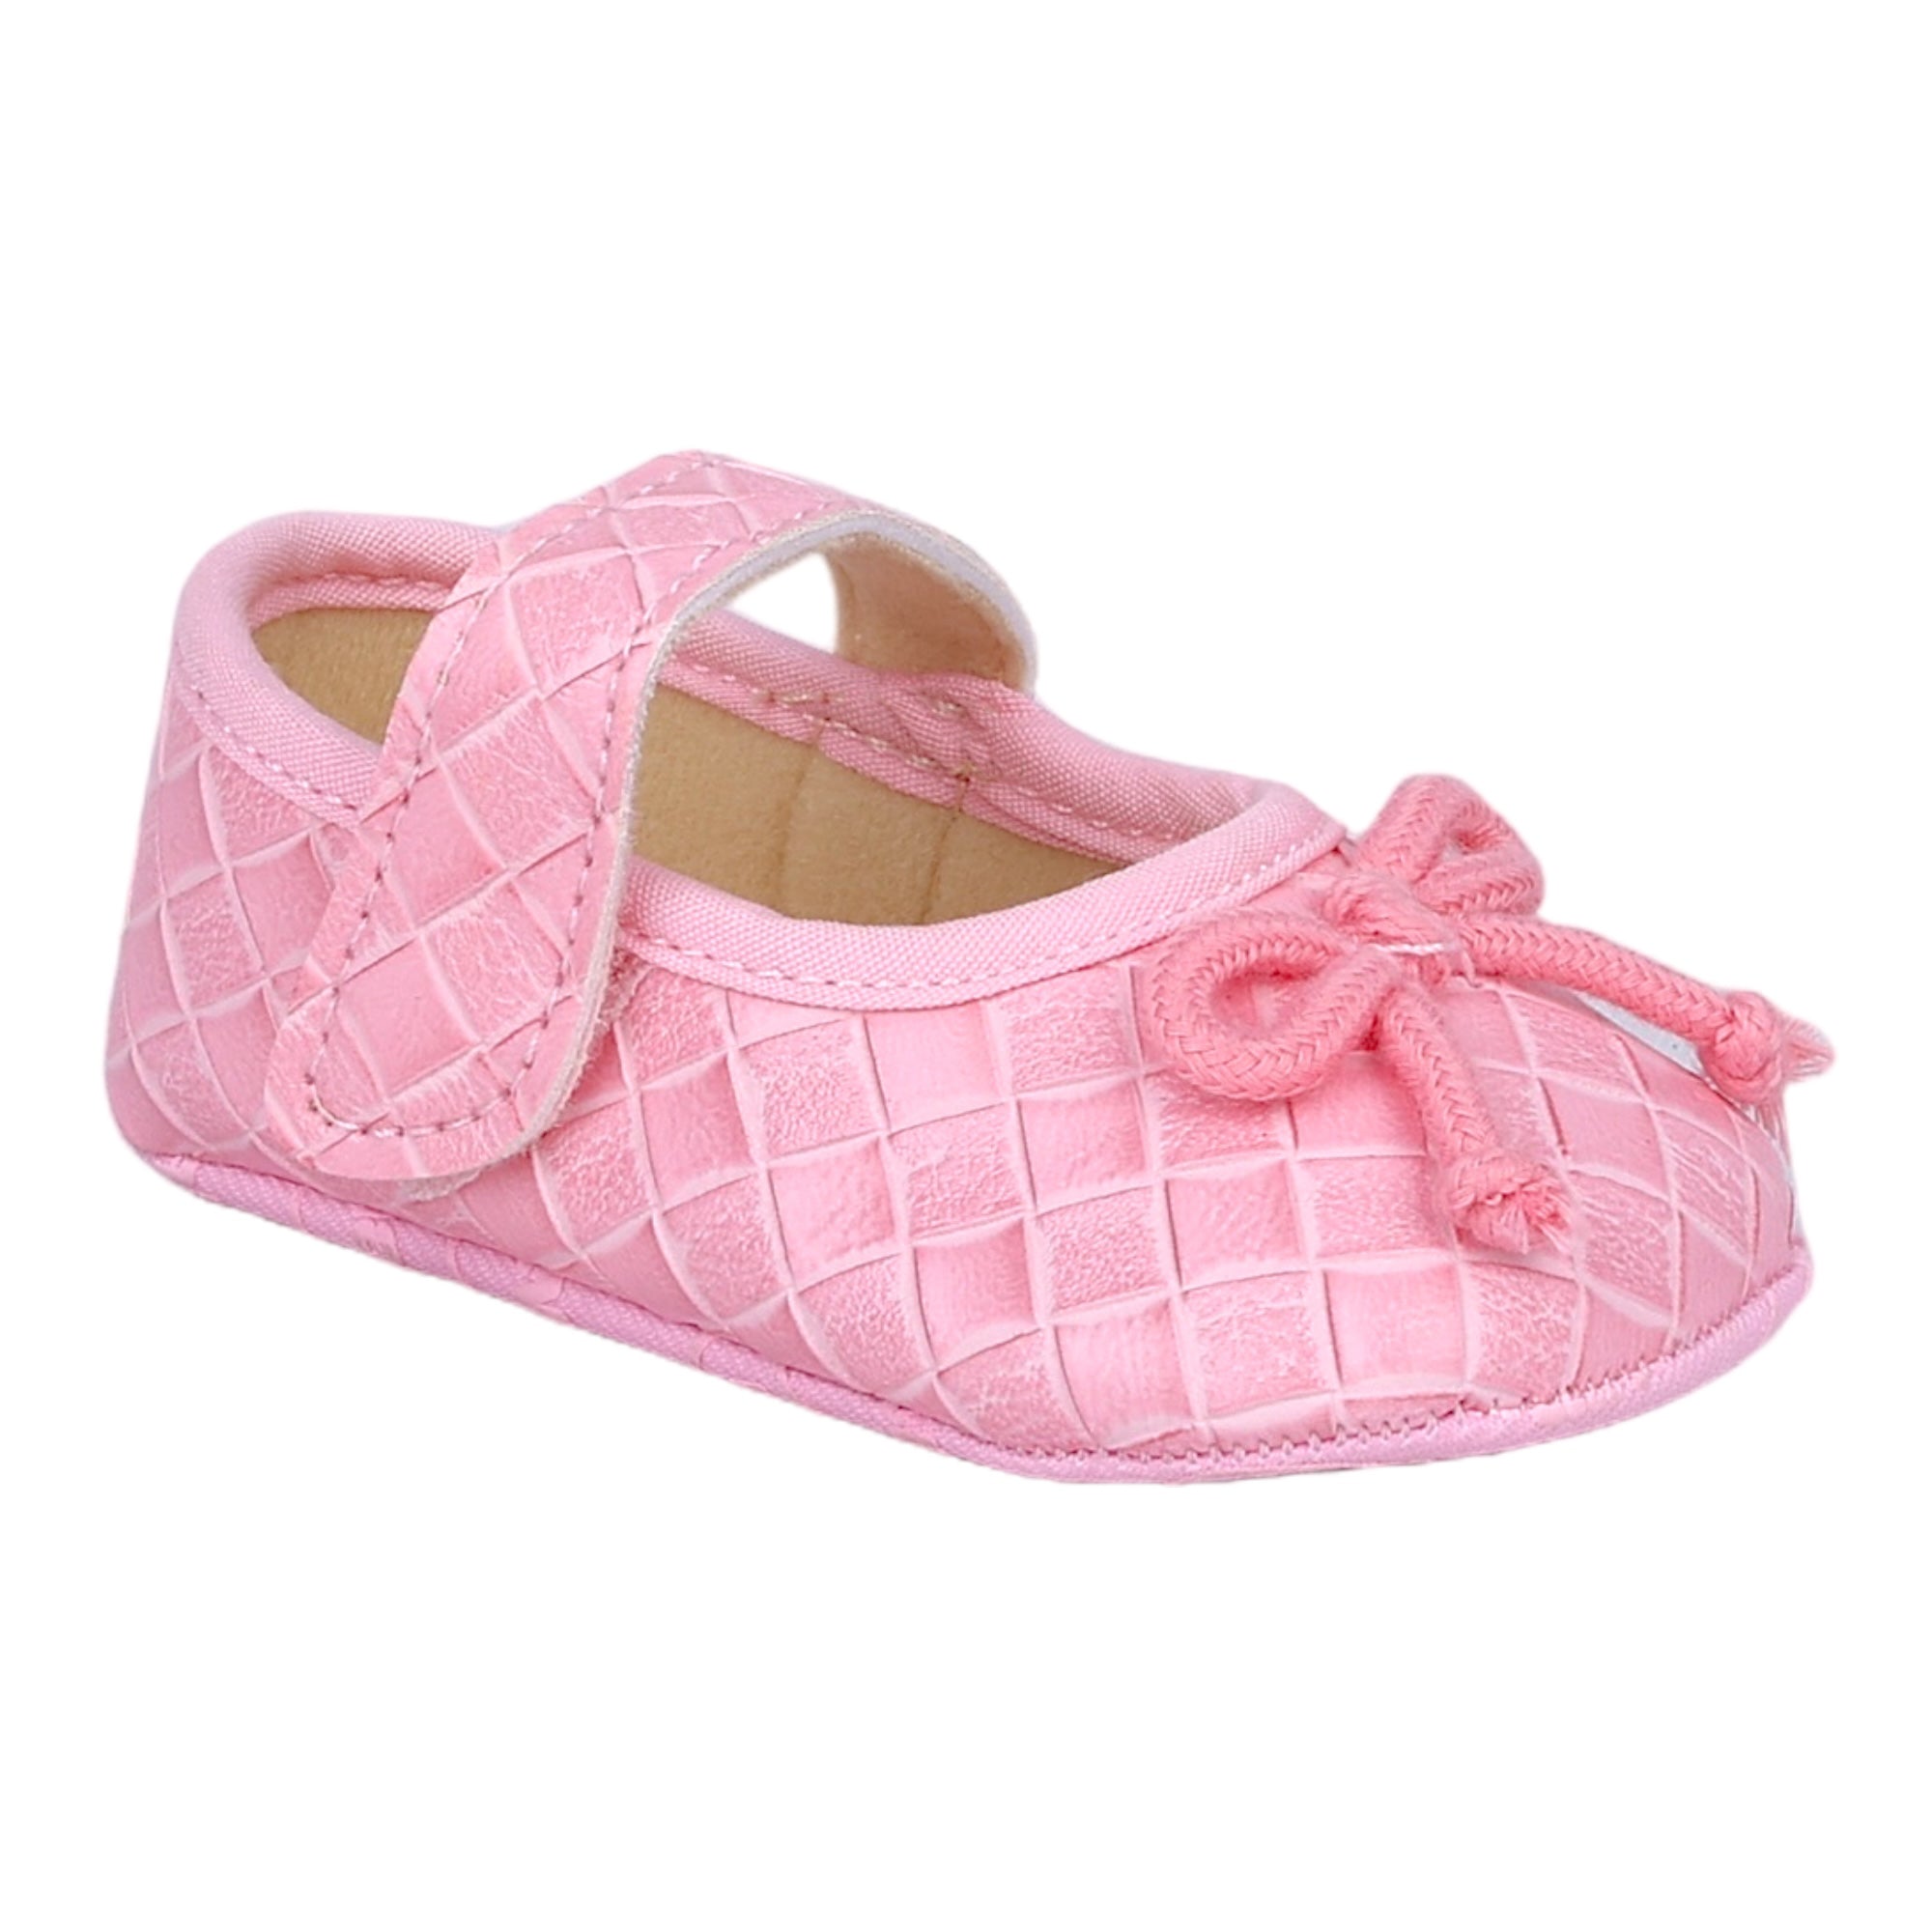 Baby Moo Bow Knot Velcro Strap Textured Leather Anti-Skid Ballerina Booties - Pink